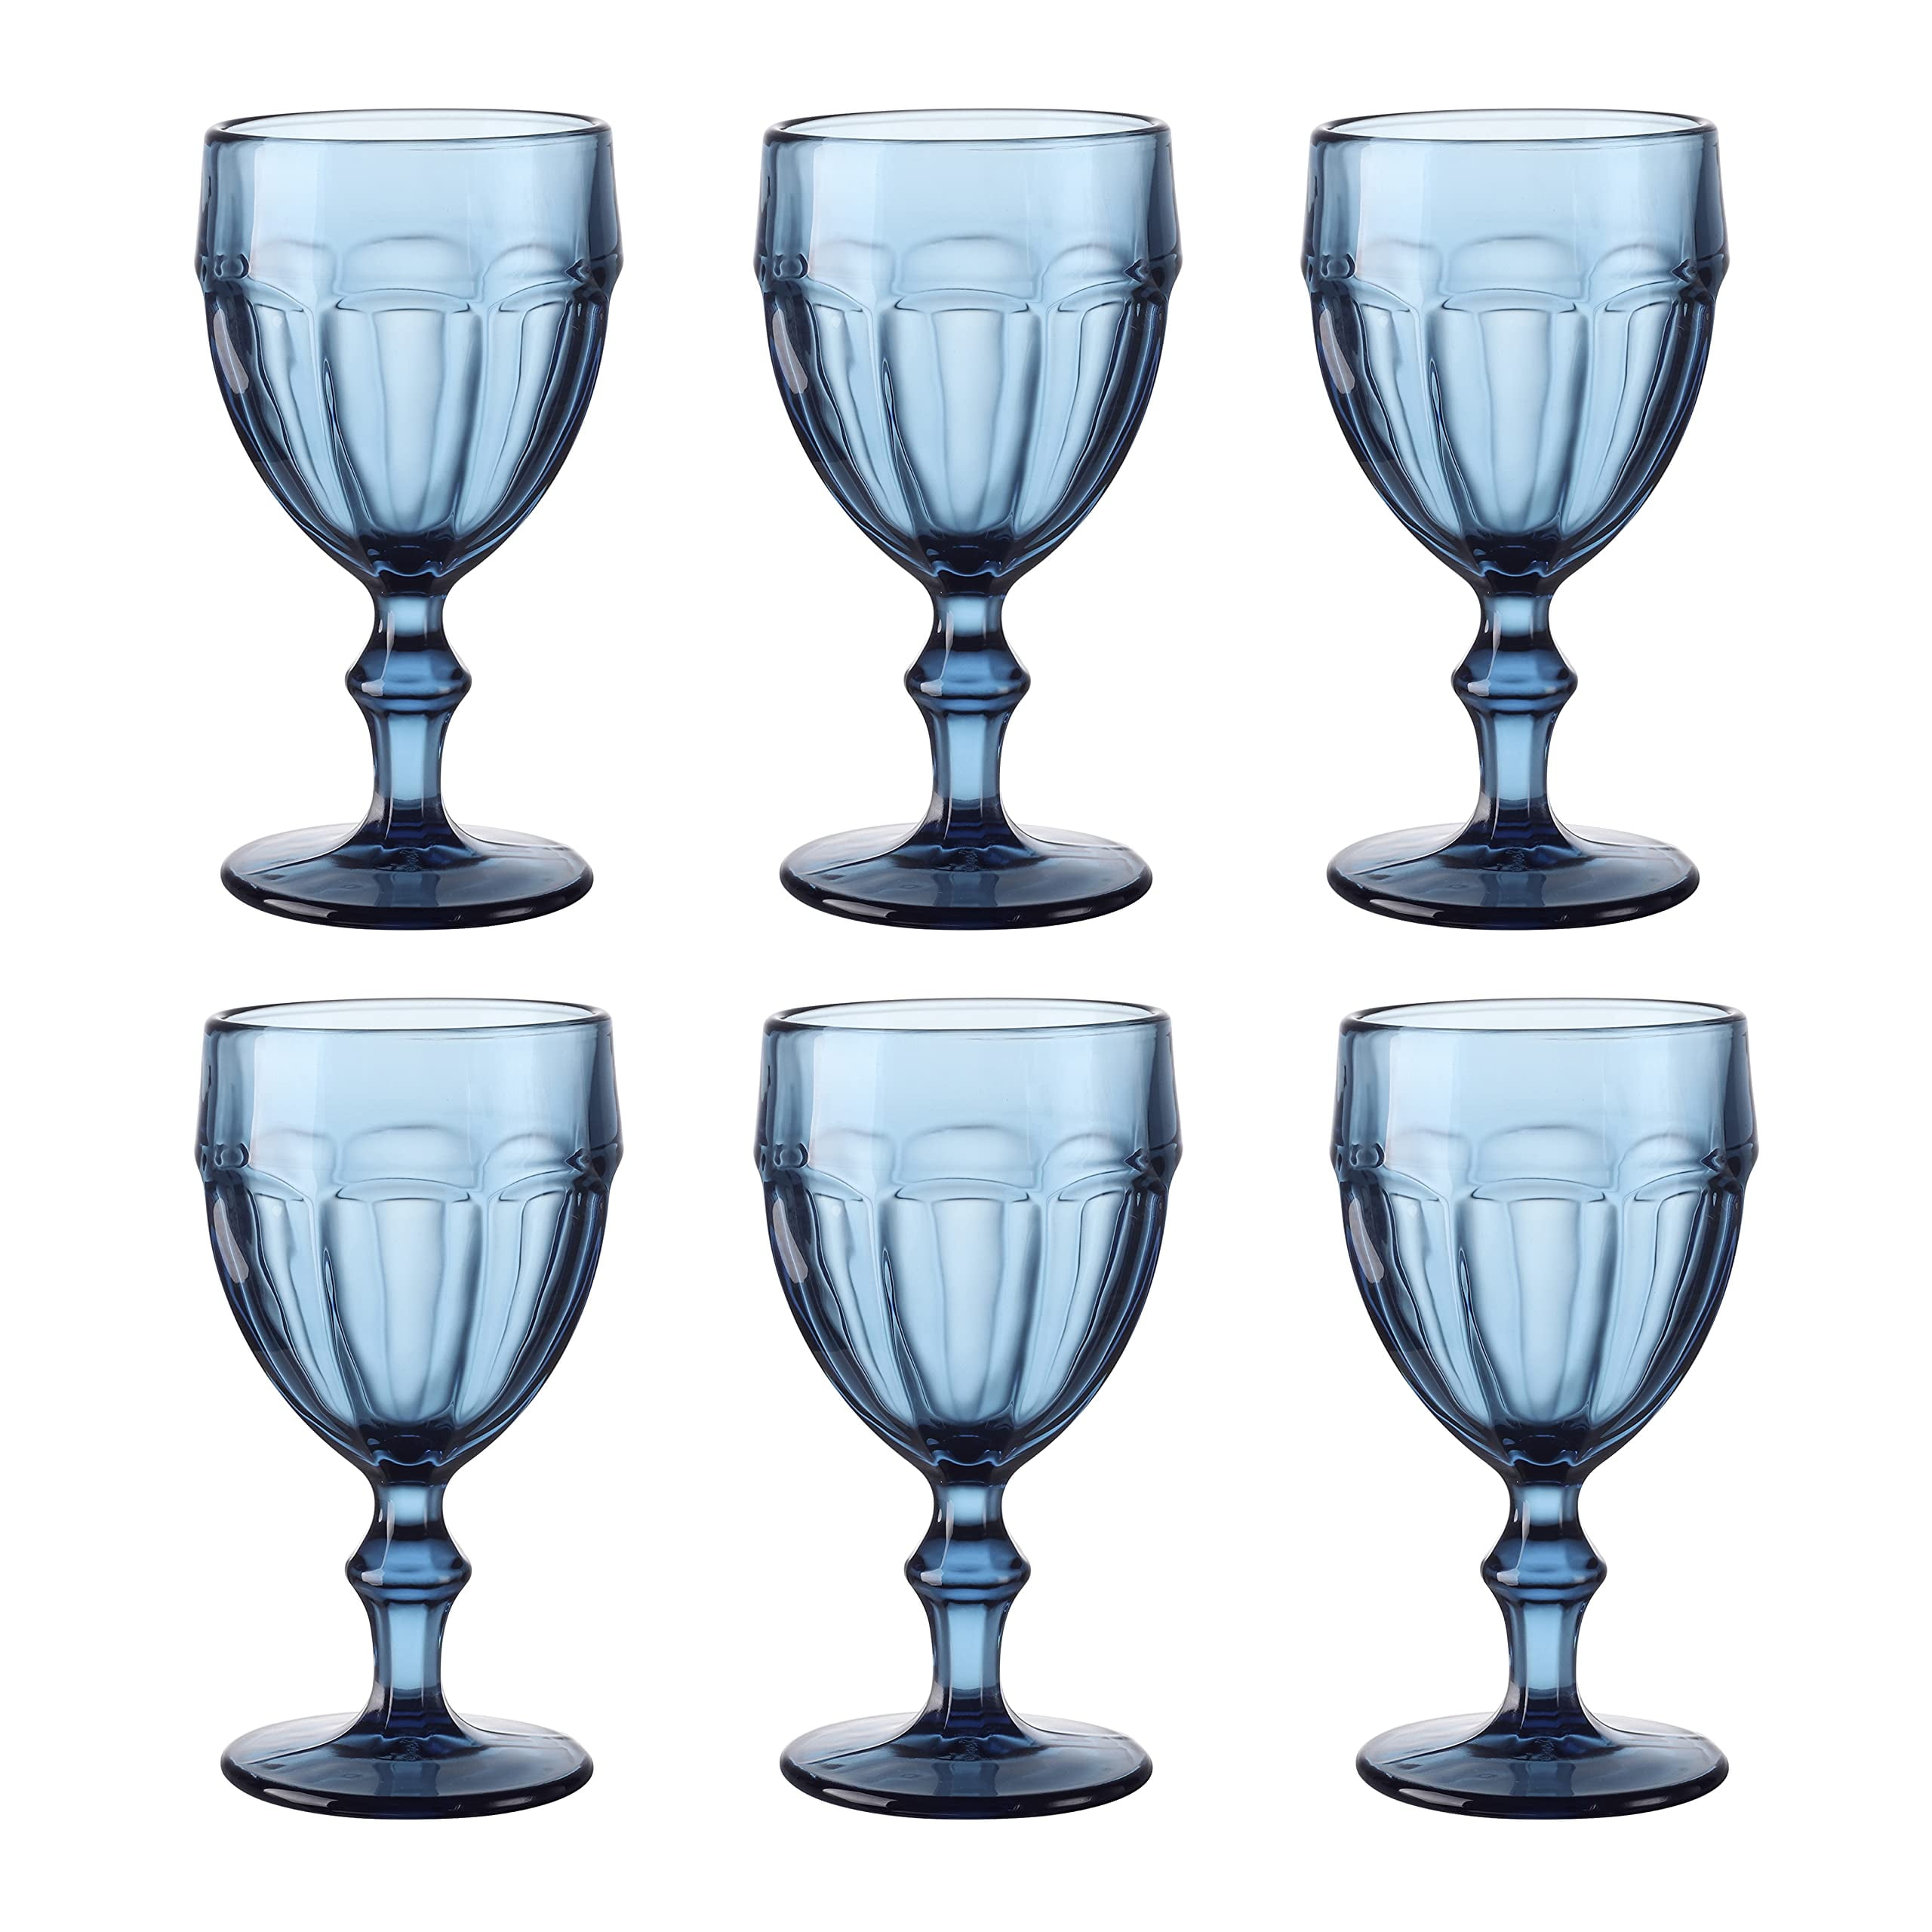 LIBBY GIBRALTAR BEVERAGE GLASSES - 18 PIECE DURATUFF SET*** - household  items - by owner - housewares sale 